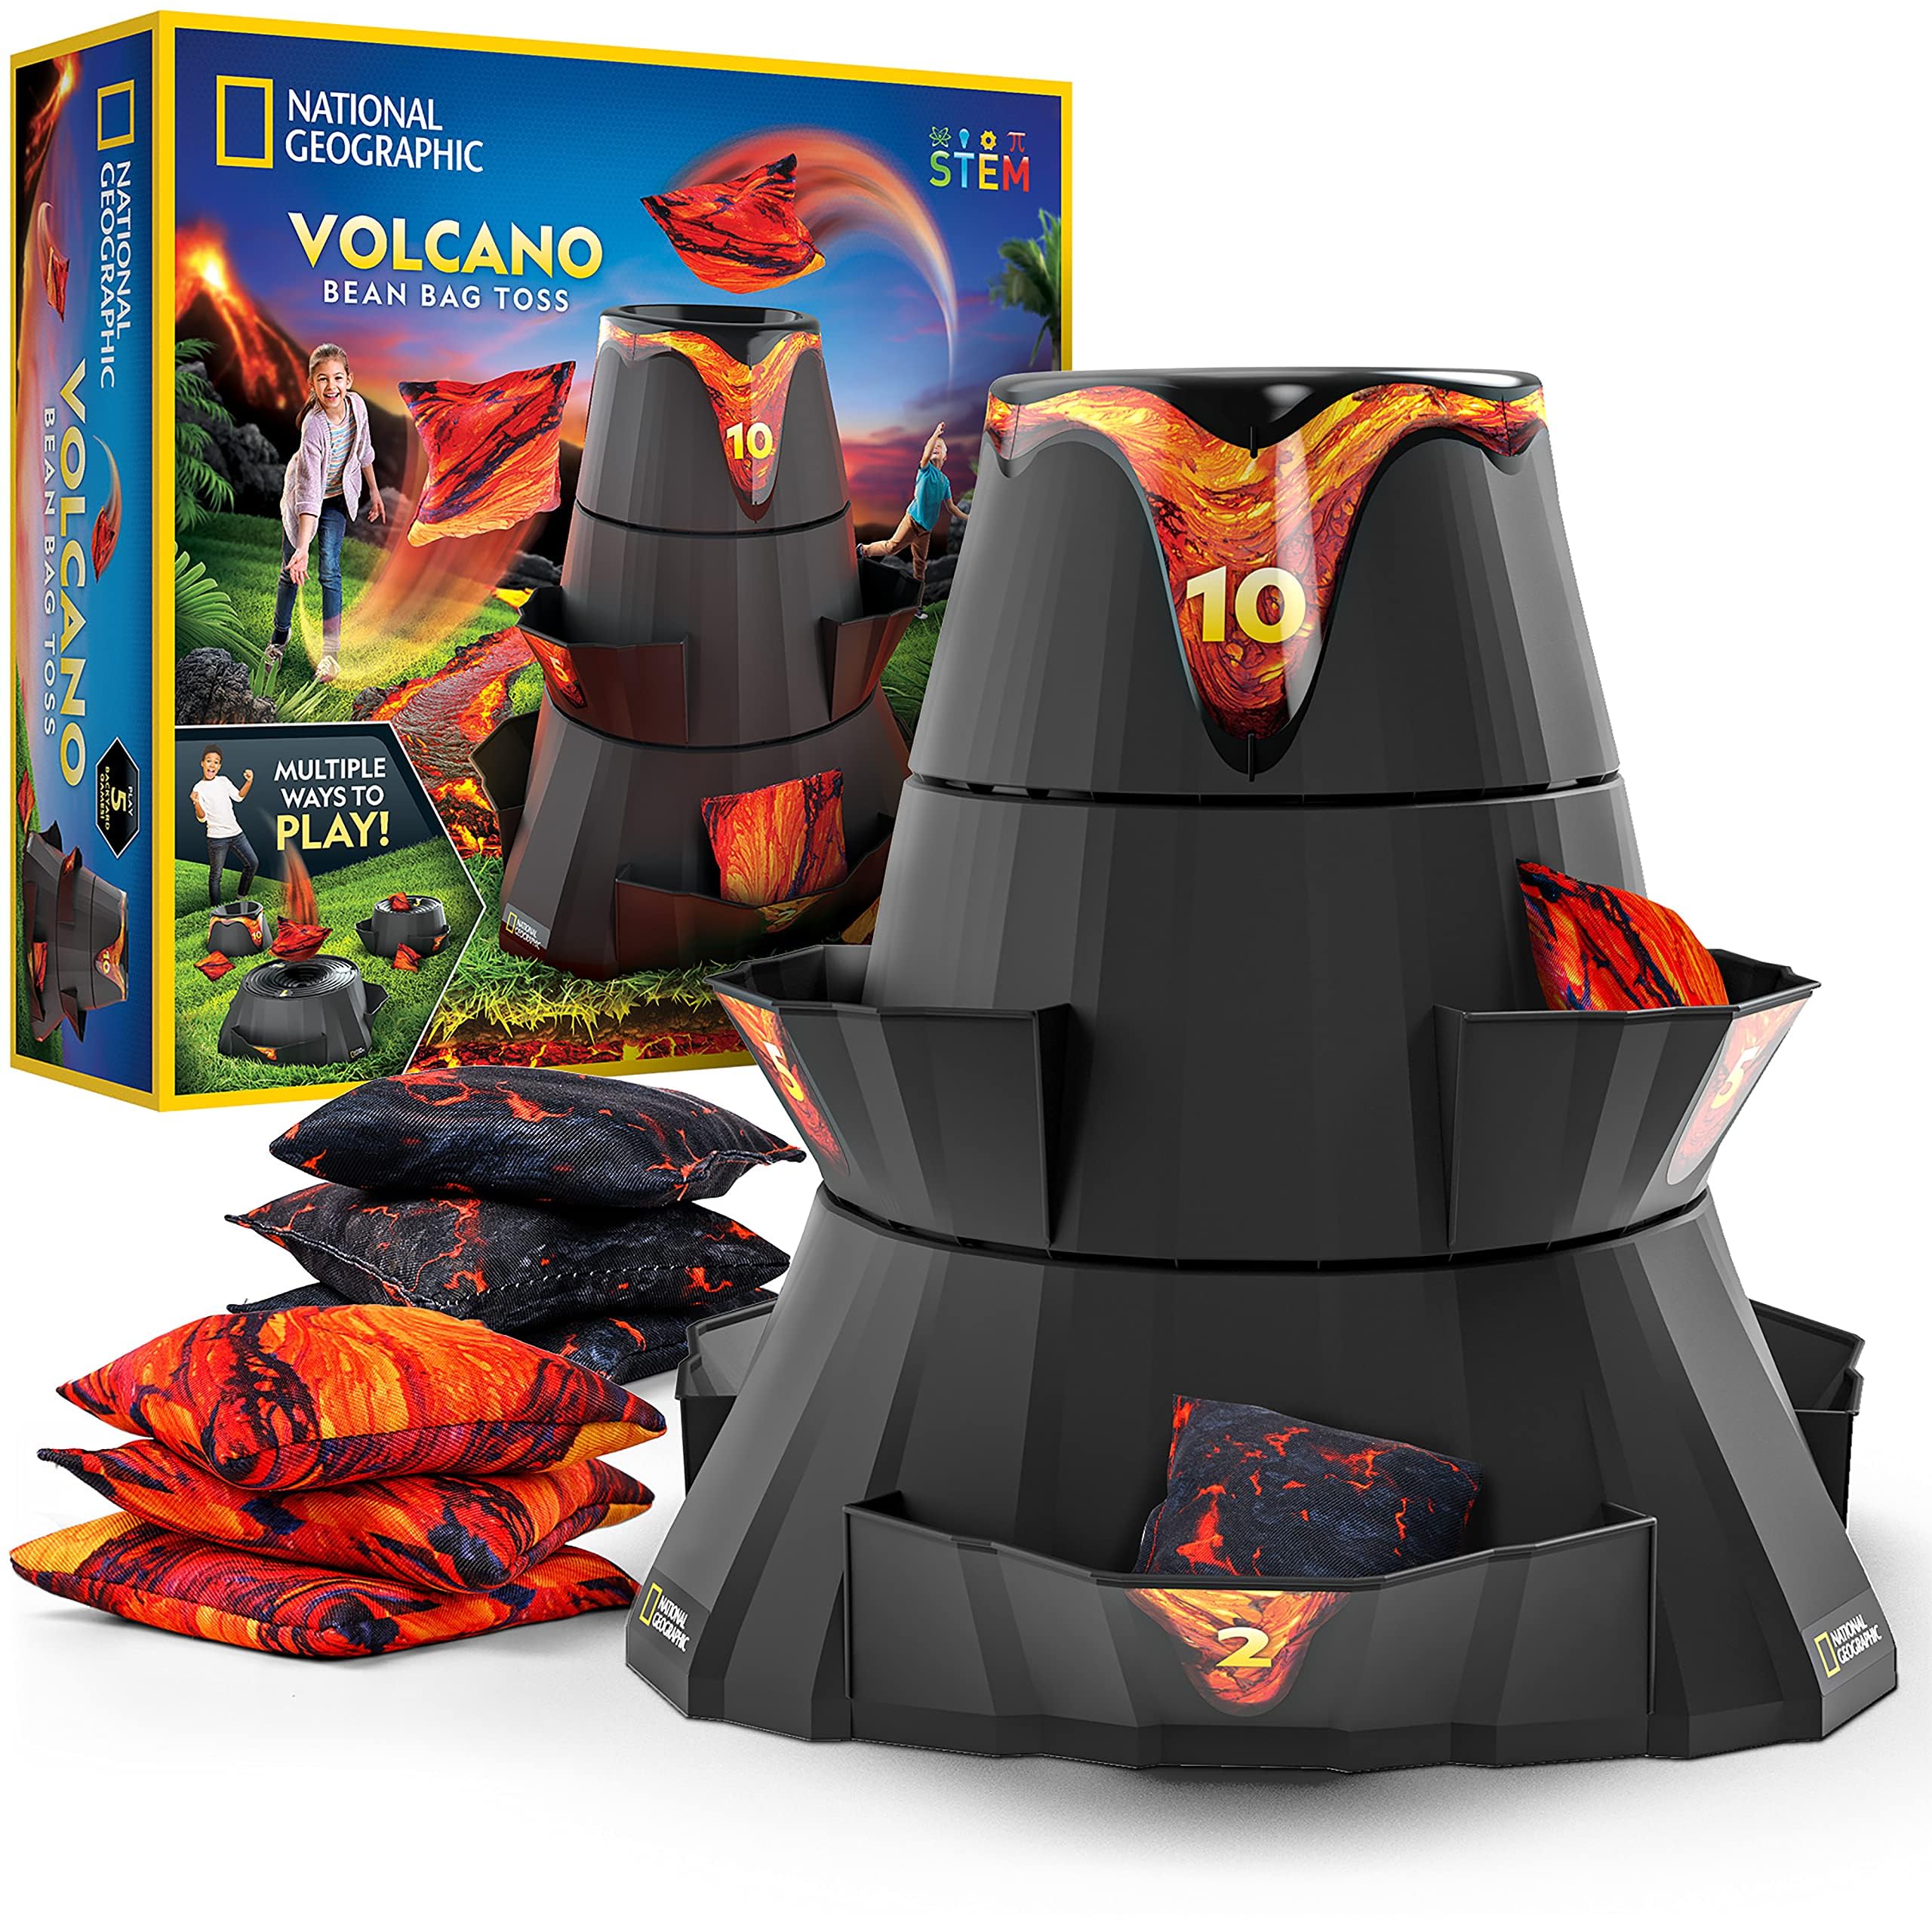 National Geographic Volcano Bean Bag Toss Game (Kids Cornhole Set w/ 5 Game Modes) $25.95 + Free Shipping w/ Prime or on $35+